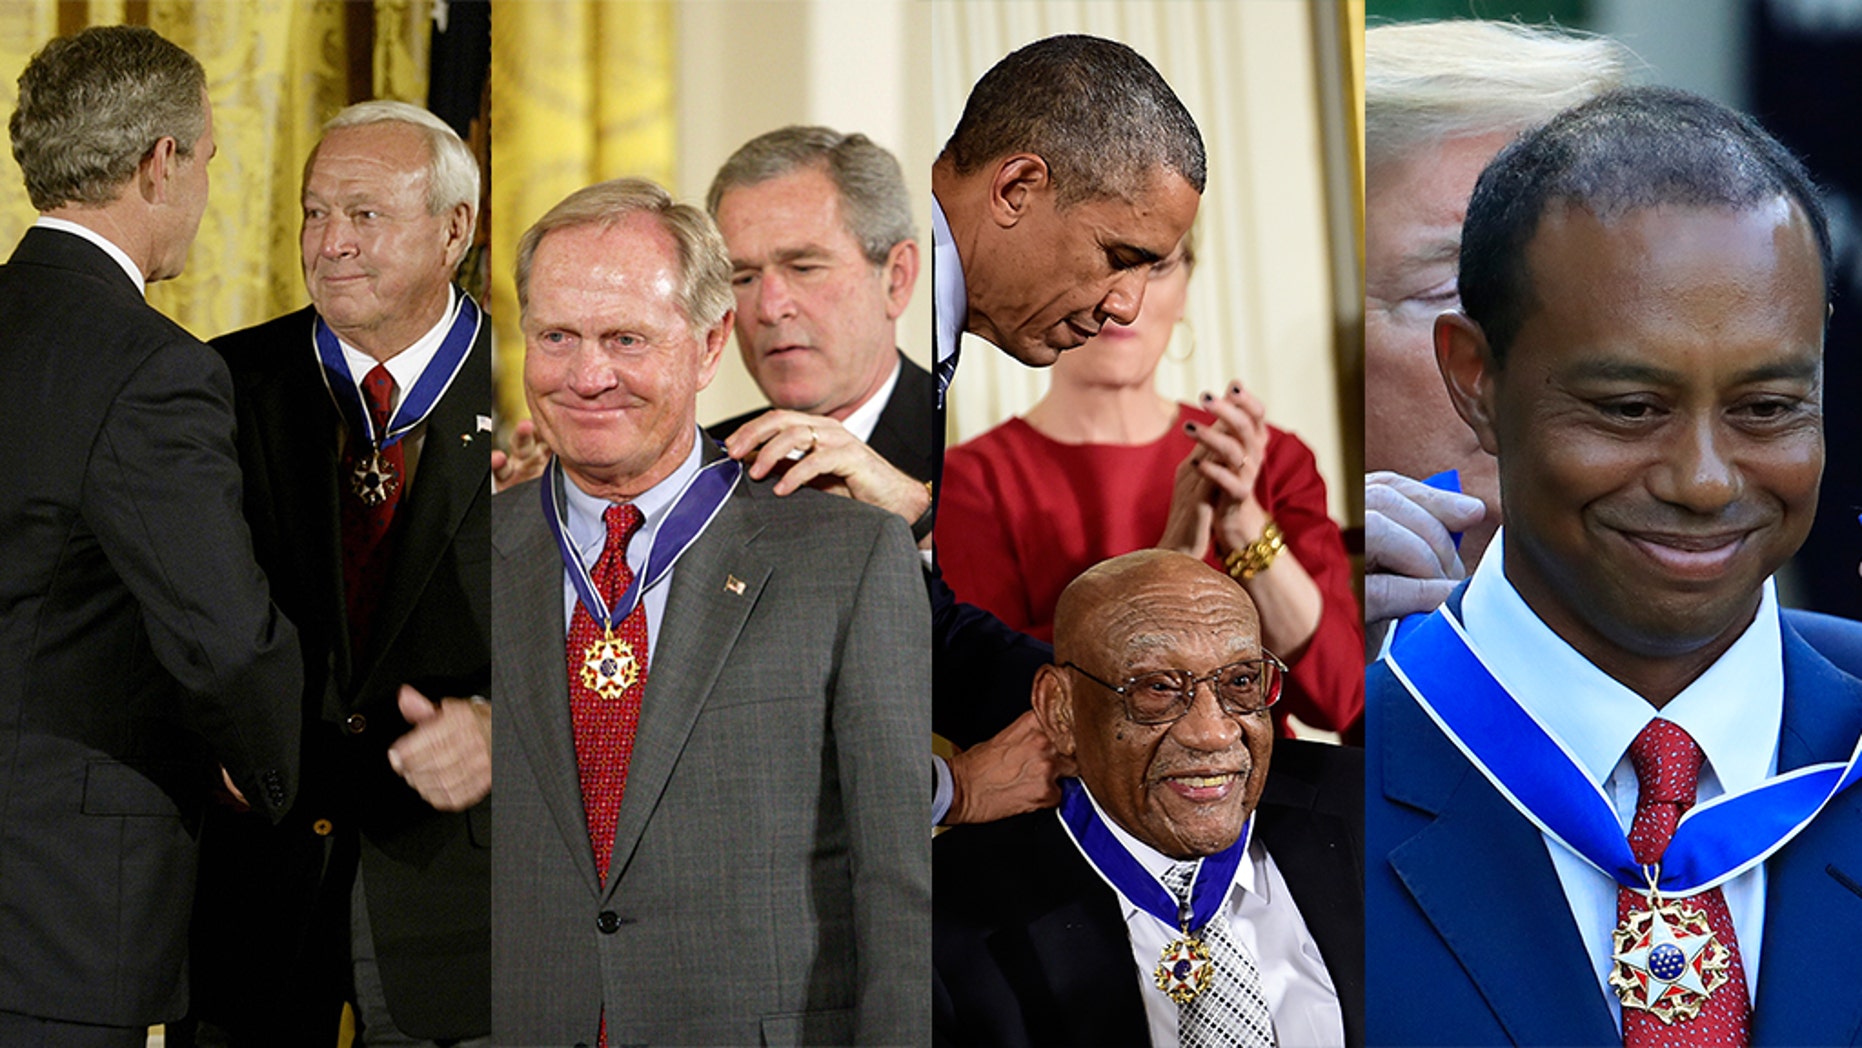 Arnold Palmer, Jack Nicklaus, Charlie Sifford and Tiger Woods are photographed receiving the Presidential Medal of Freedom in 2004, 2005, 2014 and 2019, respectively.